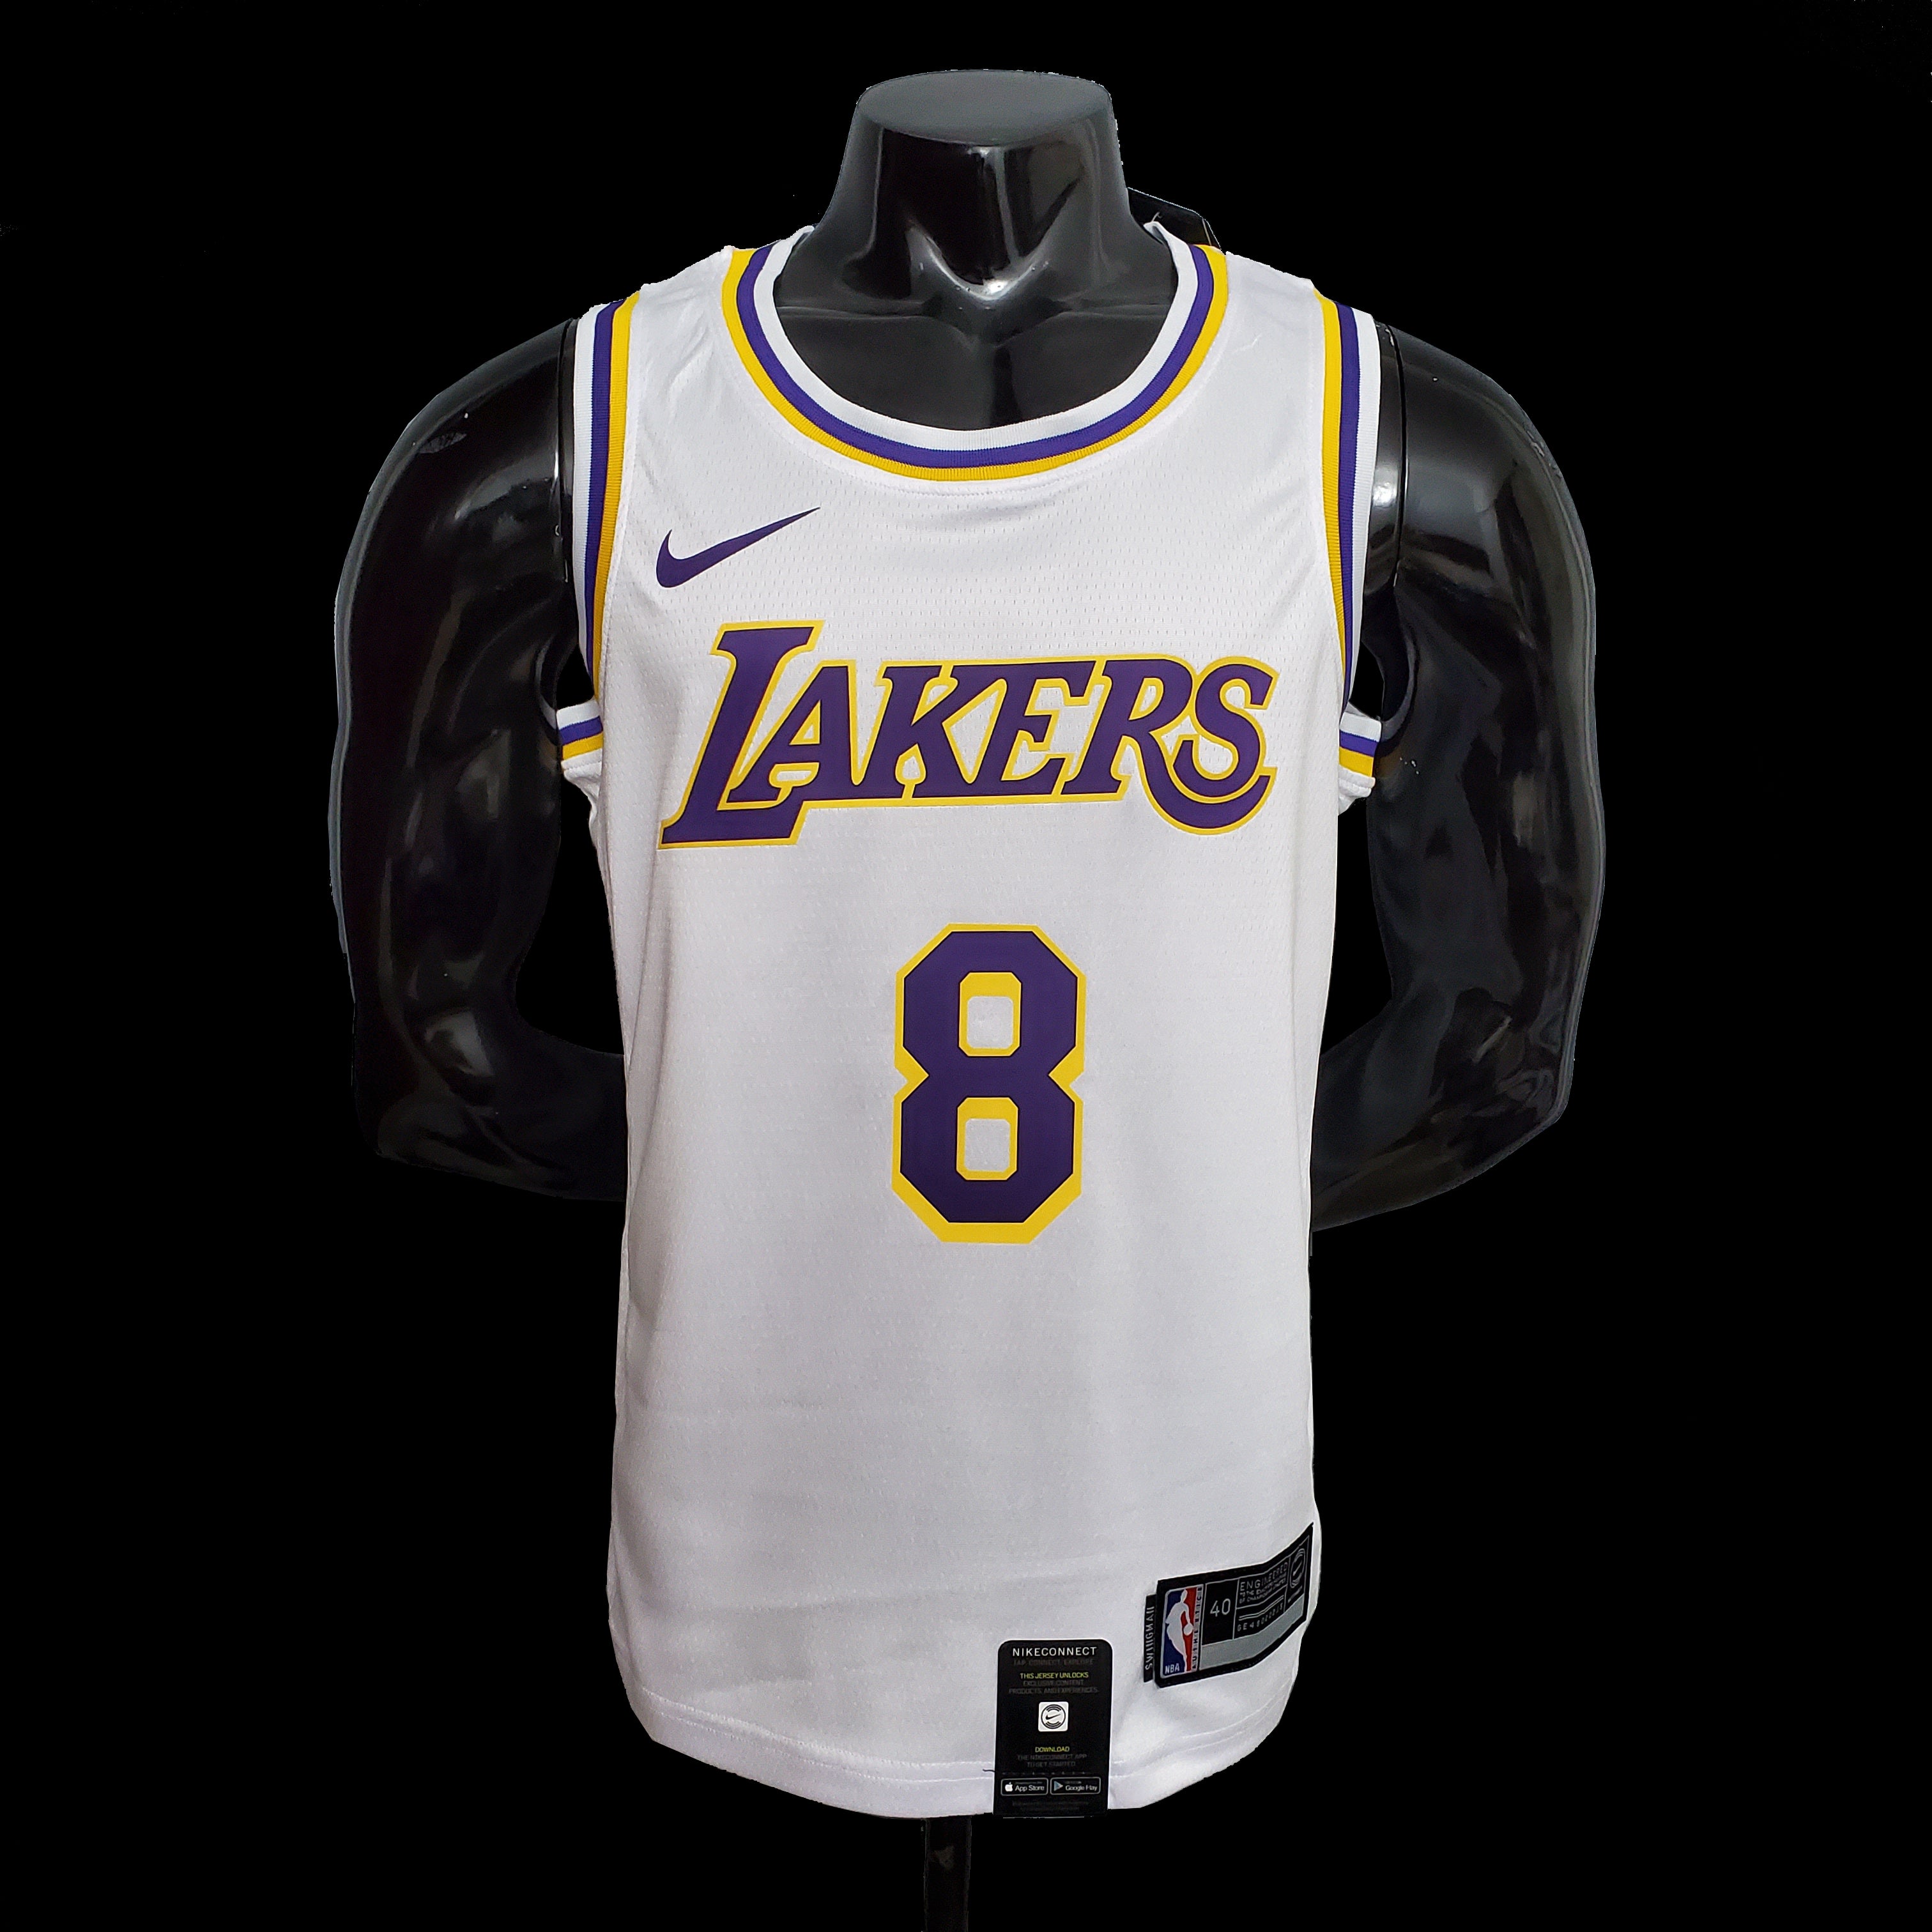 kobe bryant jersey with sleeves